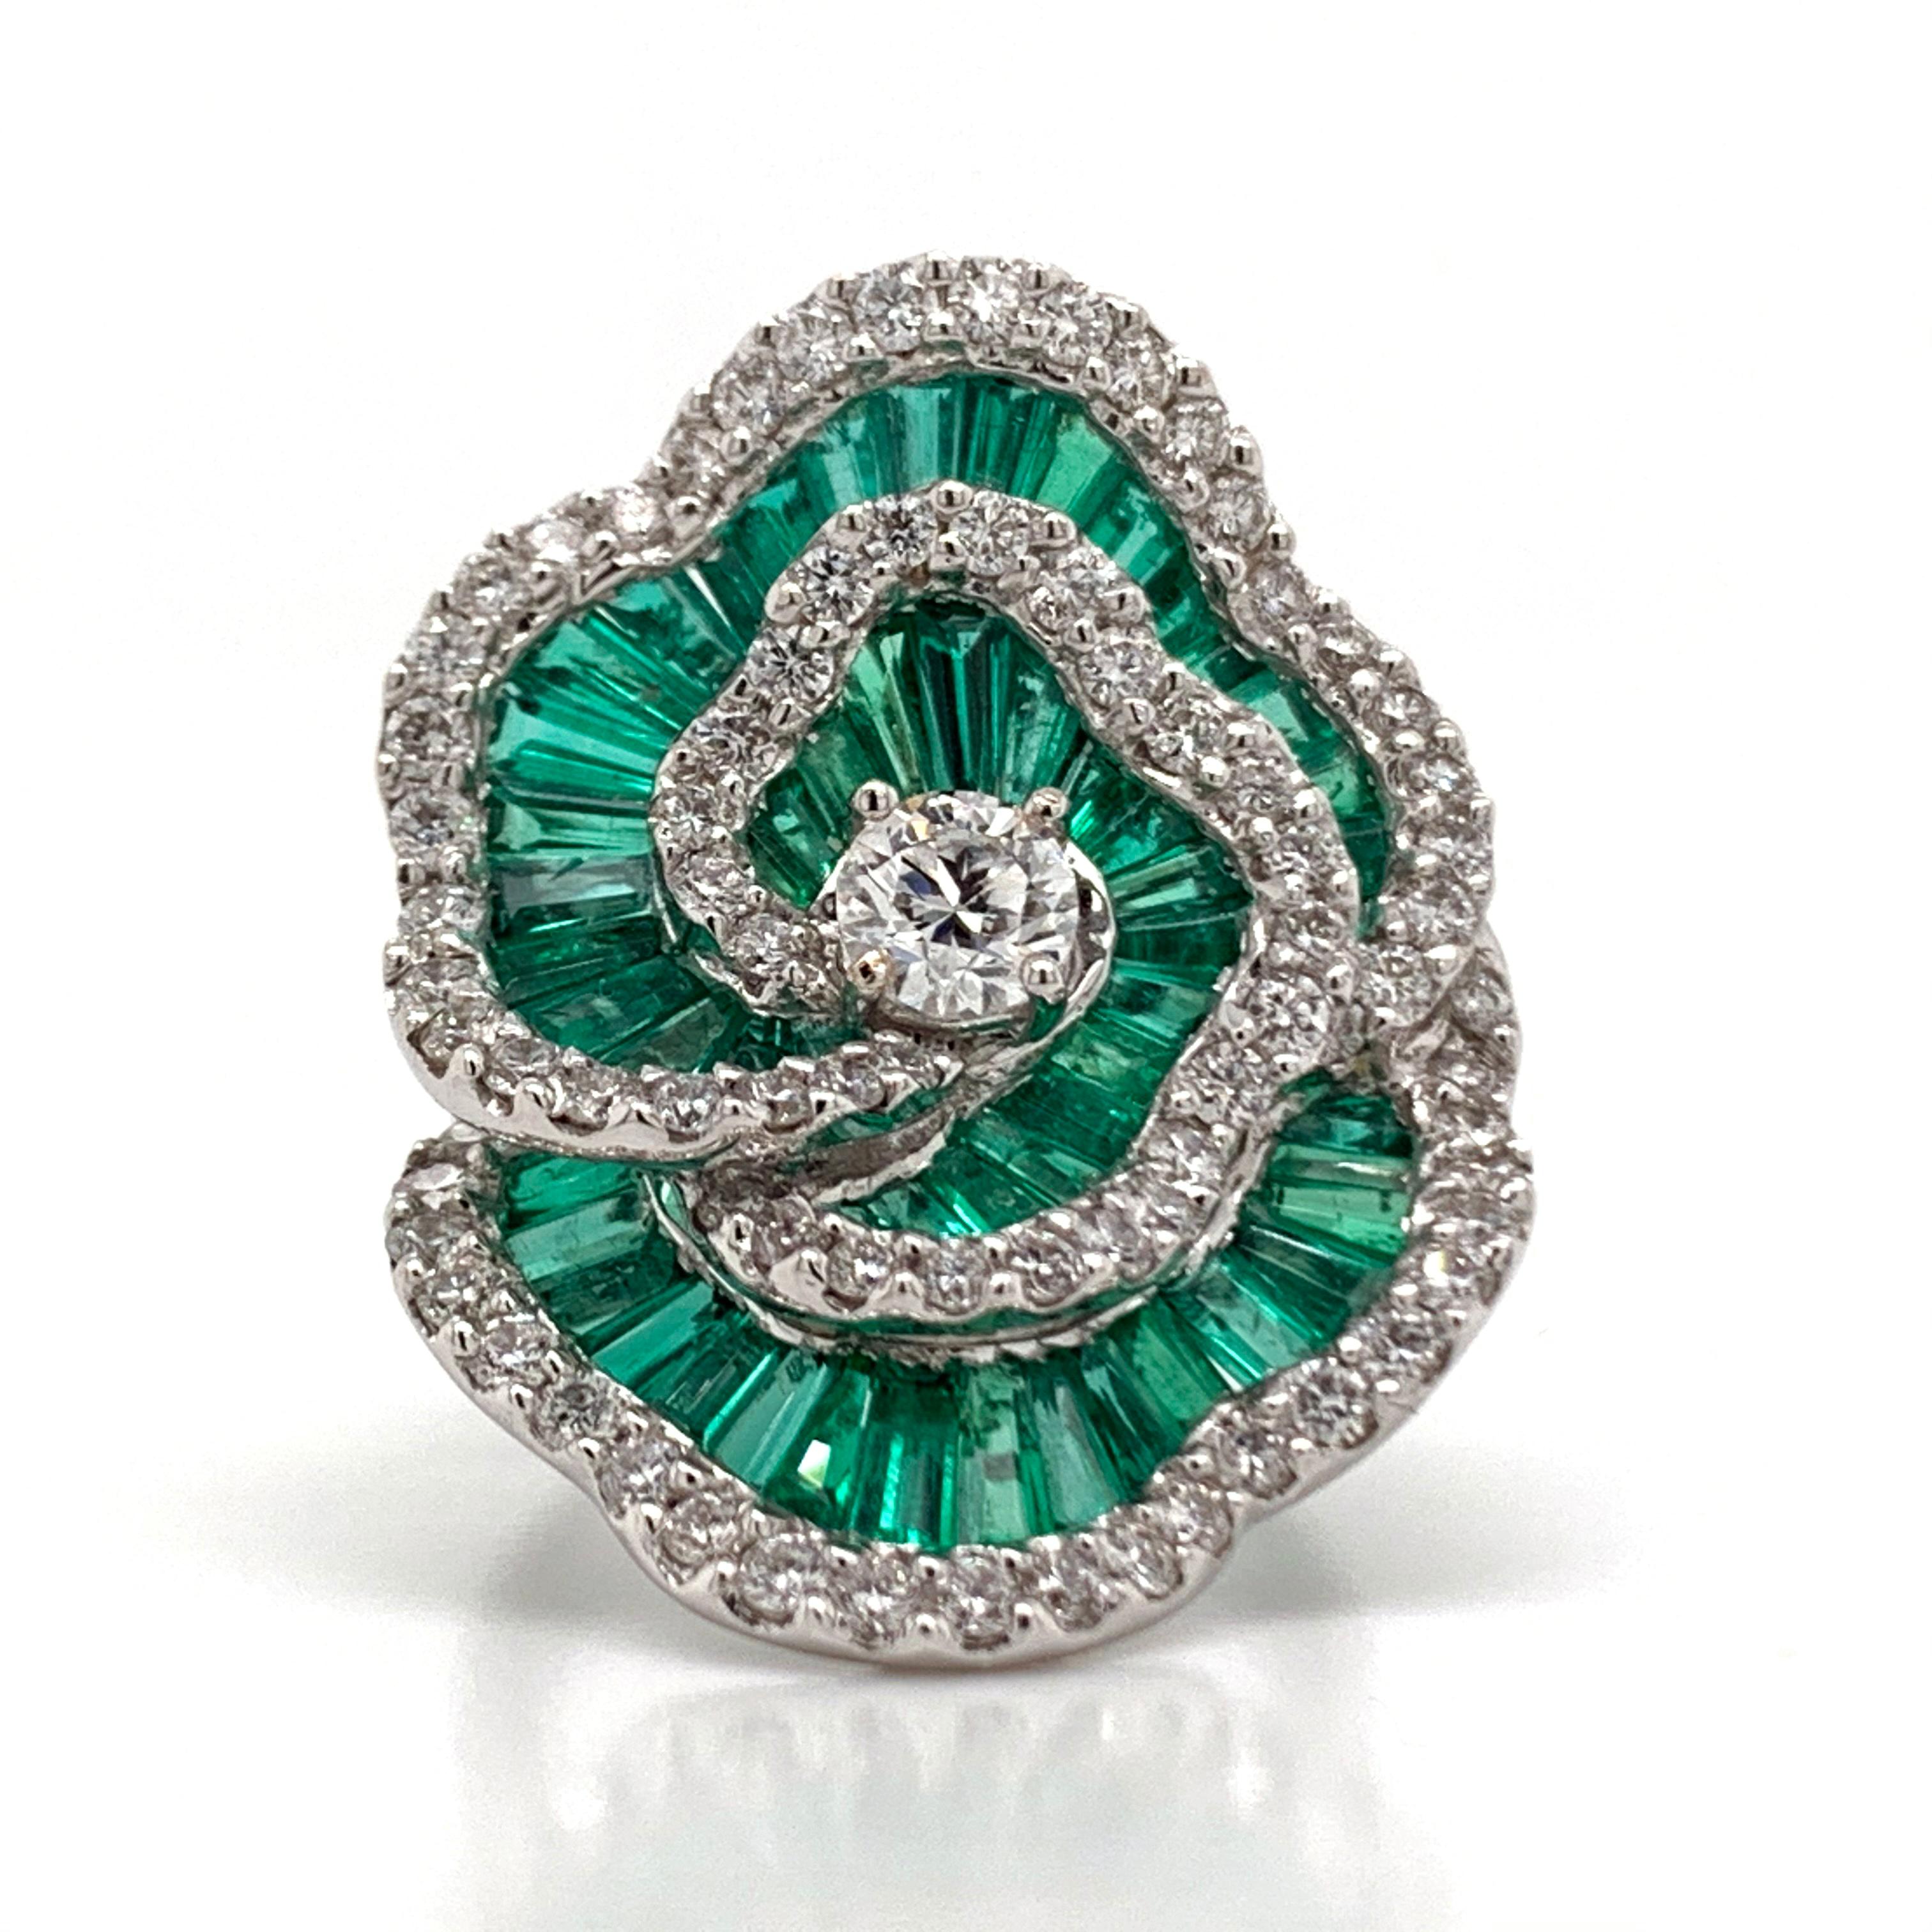 A beautiful, emerald and diamond flower ring in a US ring size 6.75 . This beautiful, gold ring  weighs 15.1 grams. Crafted, in a polished white gold the ring is includes an array of beautifully shaped emeralds showered on top by gorgeous sparkling